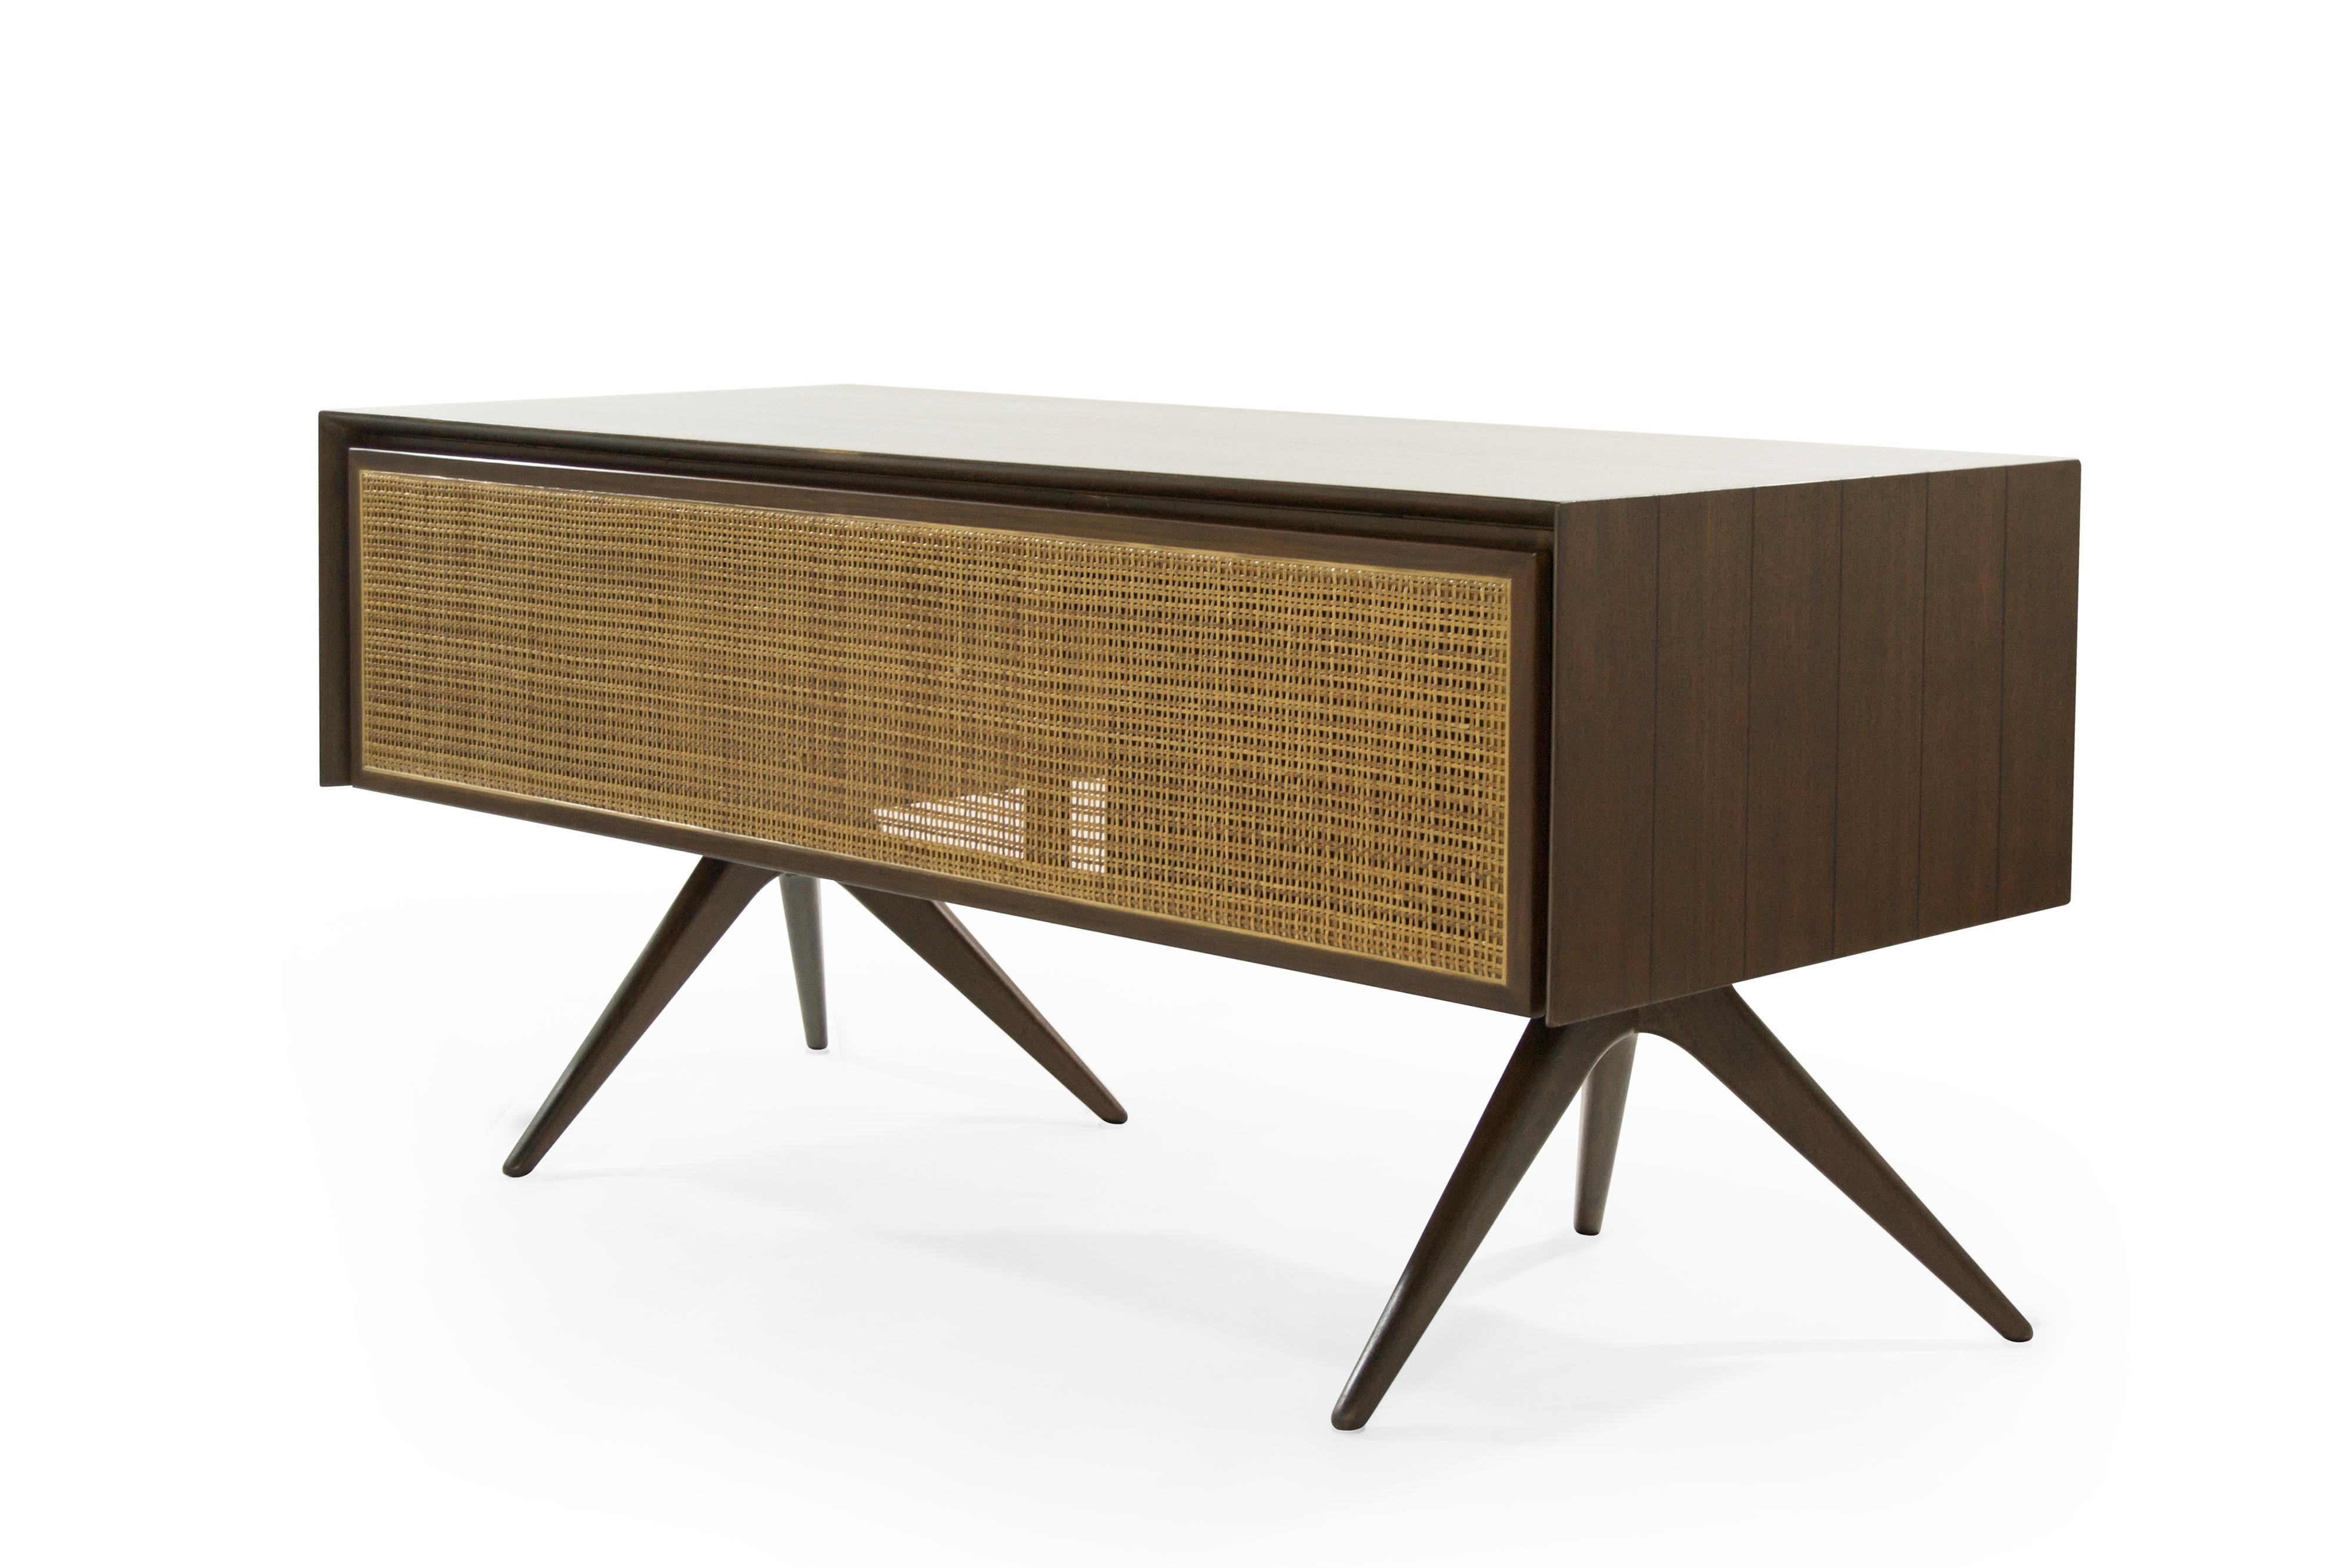 Impressive and rare walnut desk designed by Vladimir Kagan for Grosfeld House, NY, circa 1950s.

Walnut case design features ebony stripes, caned back and brass hardware. 

Completely restored to back its original glory, drawers slide smoothly